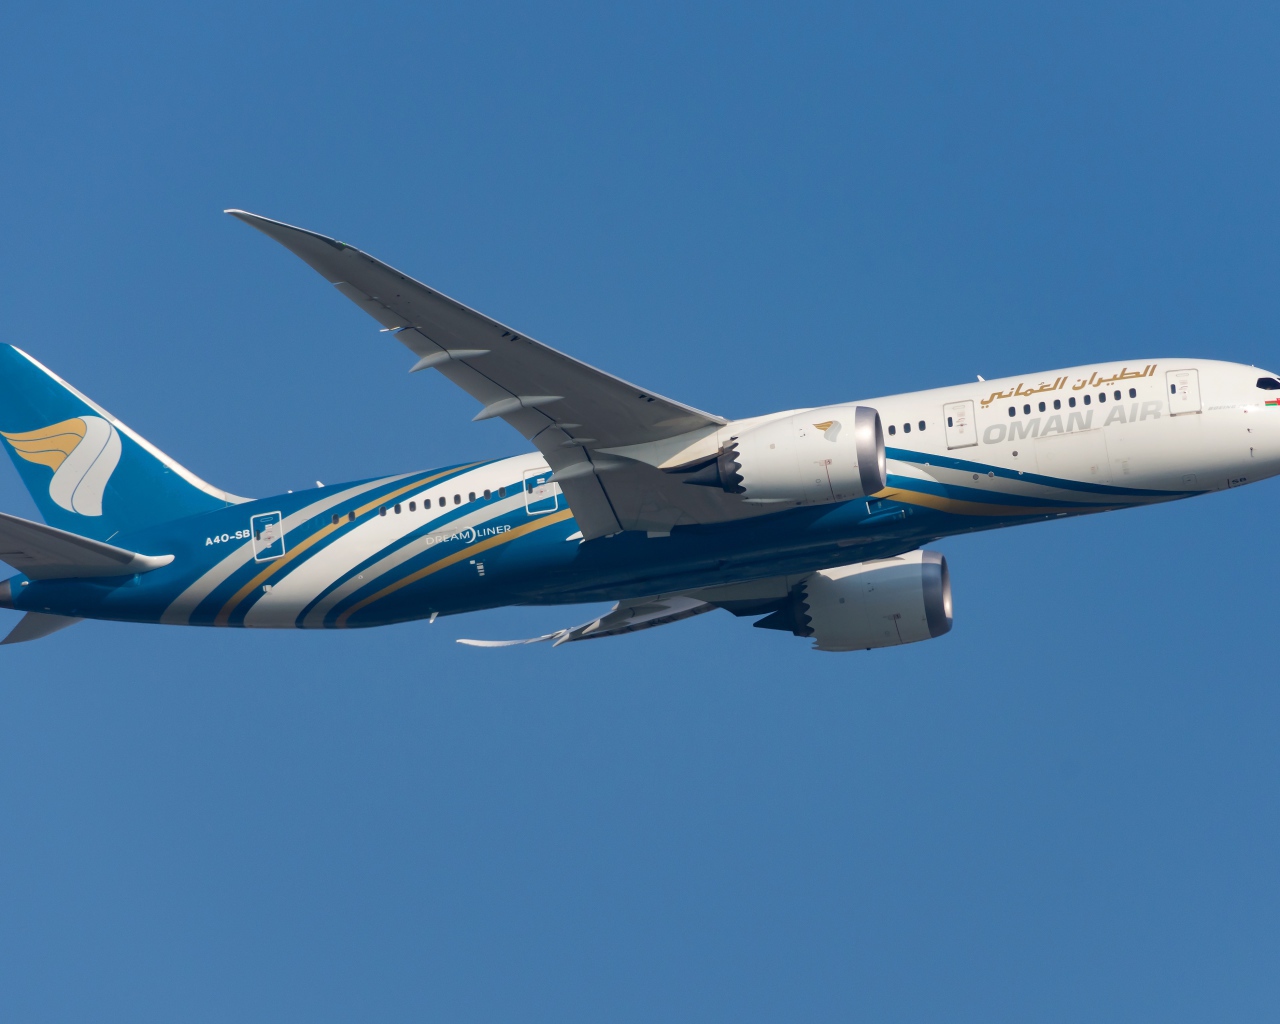 Oman Air passenger Boeing 787-8 in the blue sky